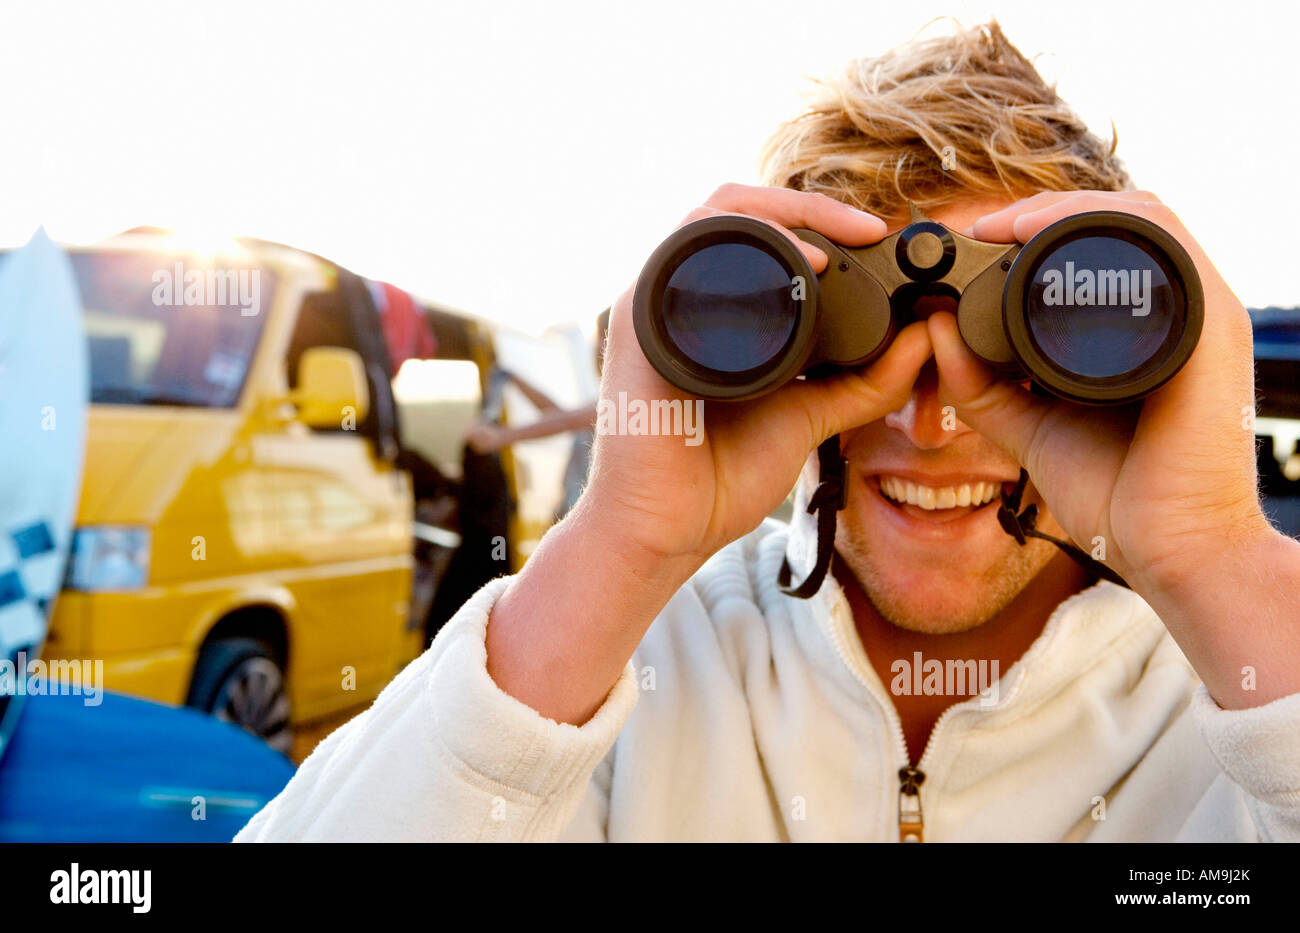 Man on beach with binoculars smiling with woman unloading van at the beach . Stock Photo